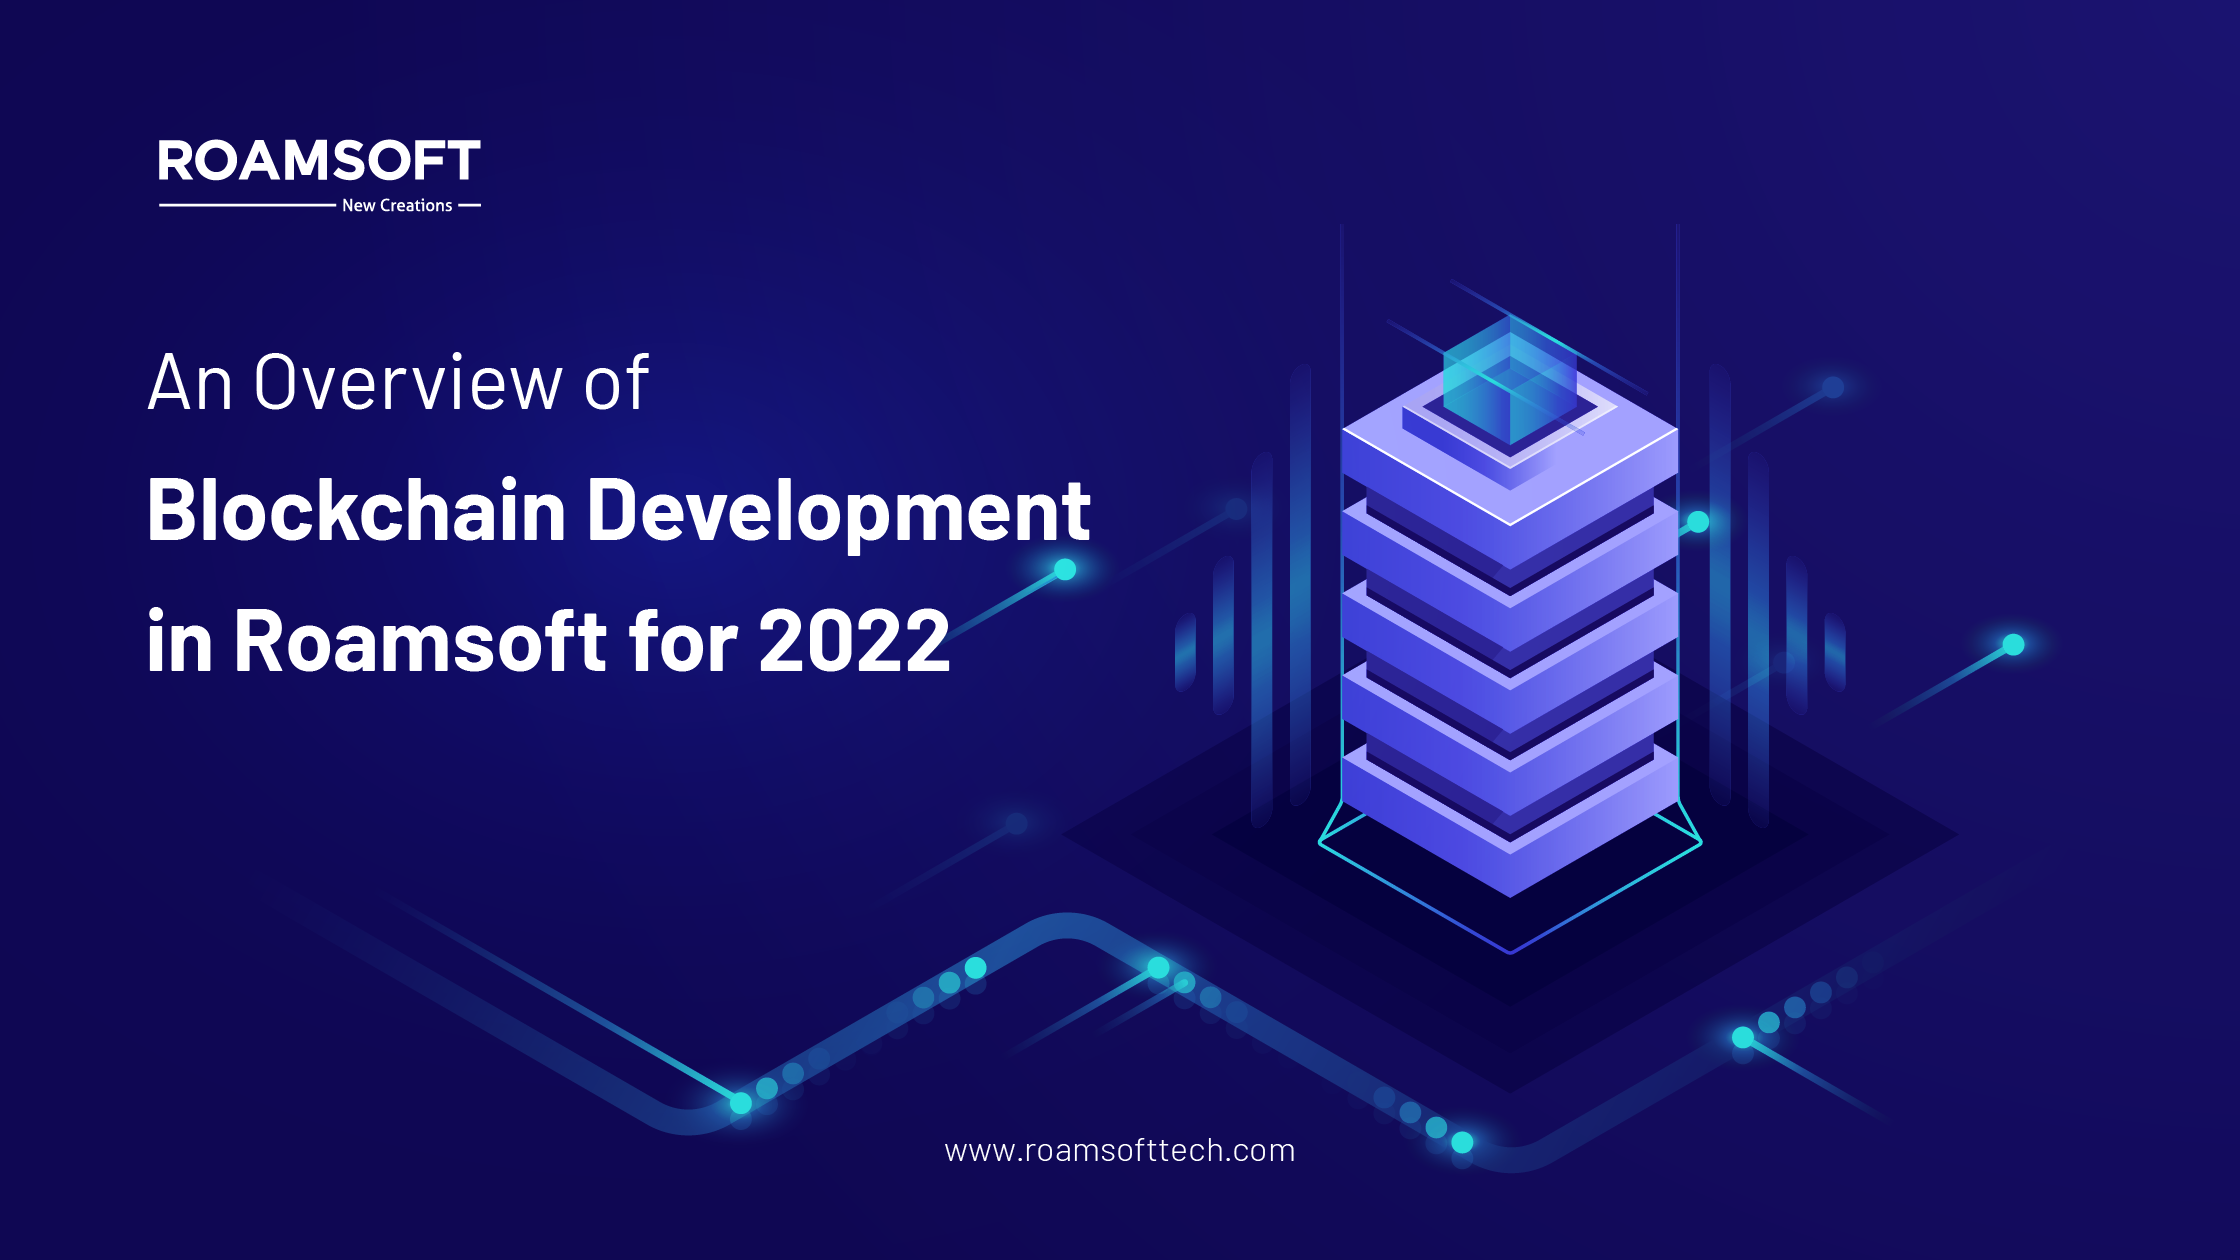 An Overview of Blockchain Development in Roamsoft for 2022